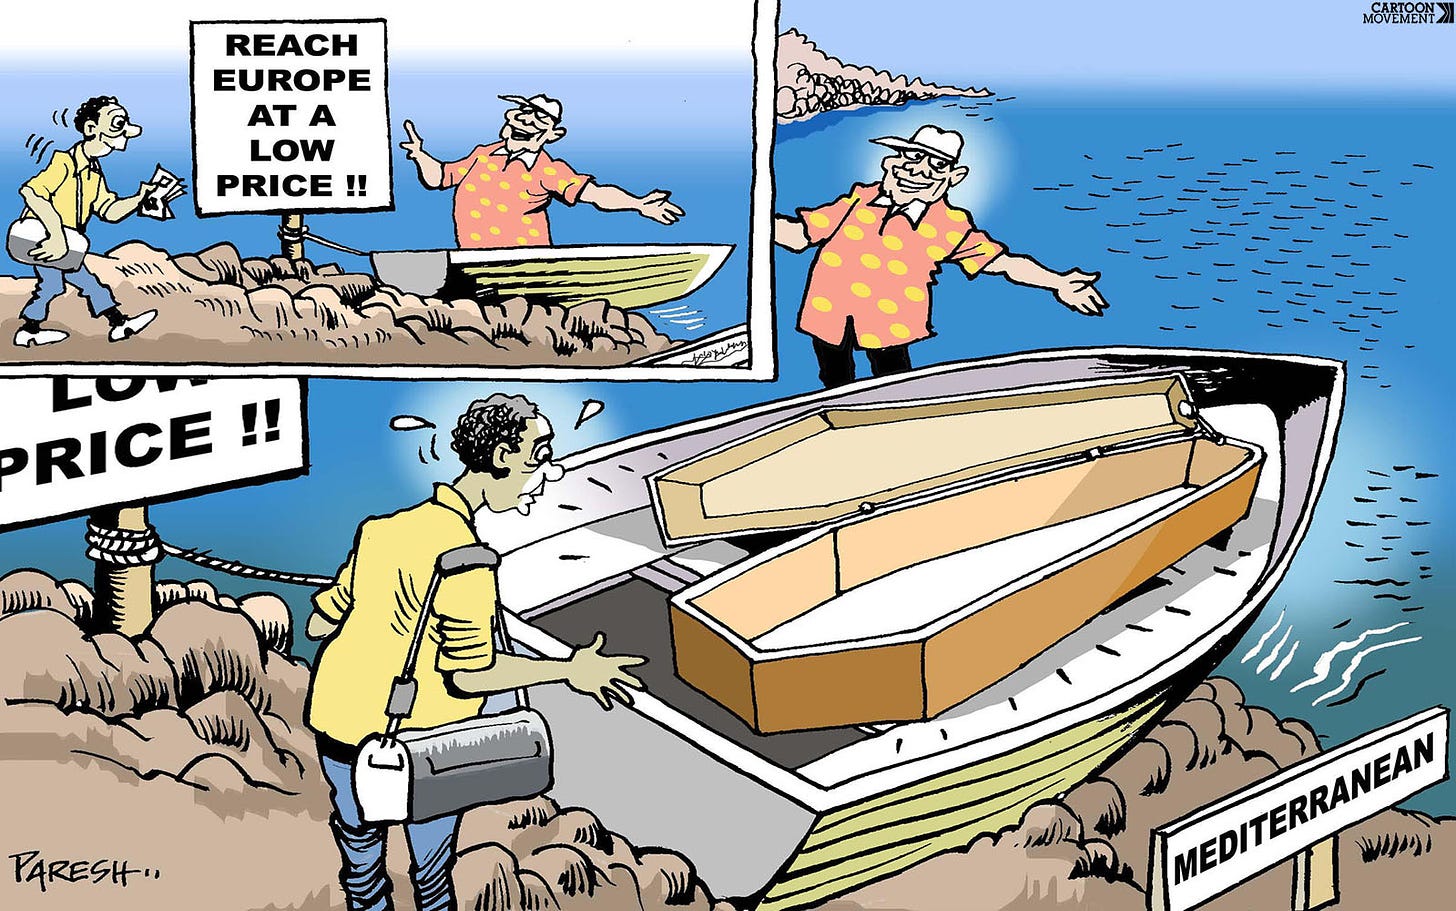 Cartoon showing a migrant being lured to a boat that's going to Europe for a low price by a human trafficker, but as the migrant gets closer to the boat it turns out the boat is a coffin, and to take it will mean a certain death.